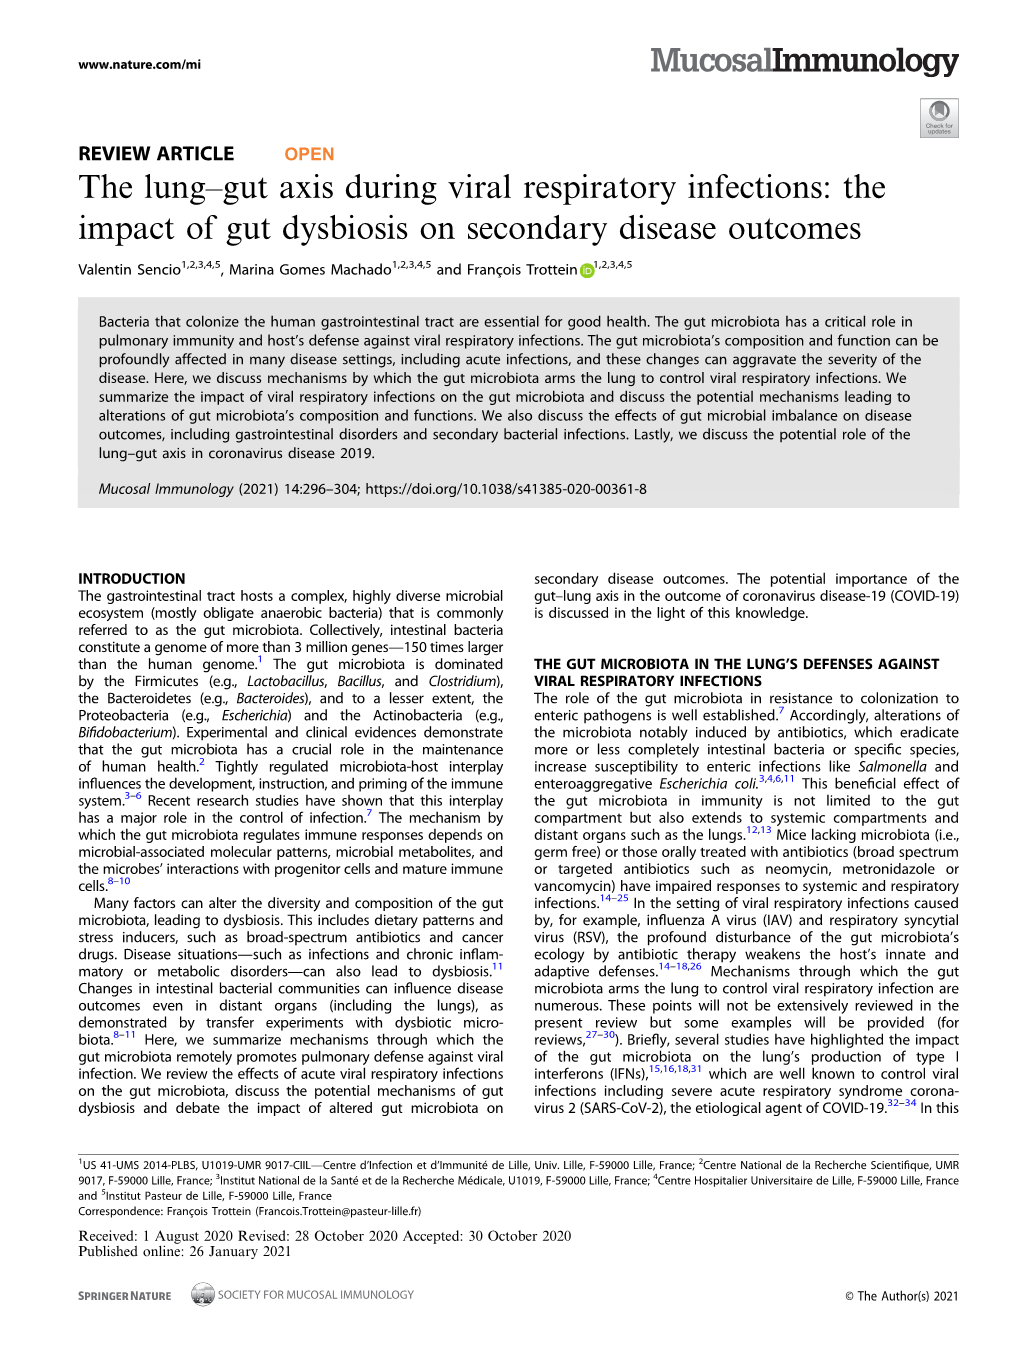 Gut Axis During Viral Respiratory Infections: the Impact of Gut Dysbiosis on Secondary Disease Outcomes